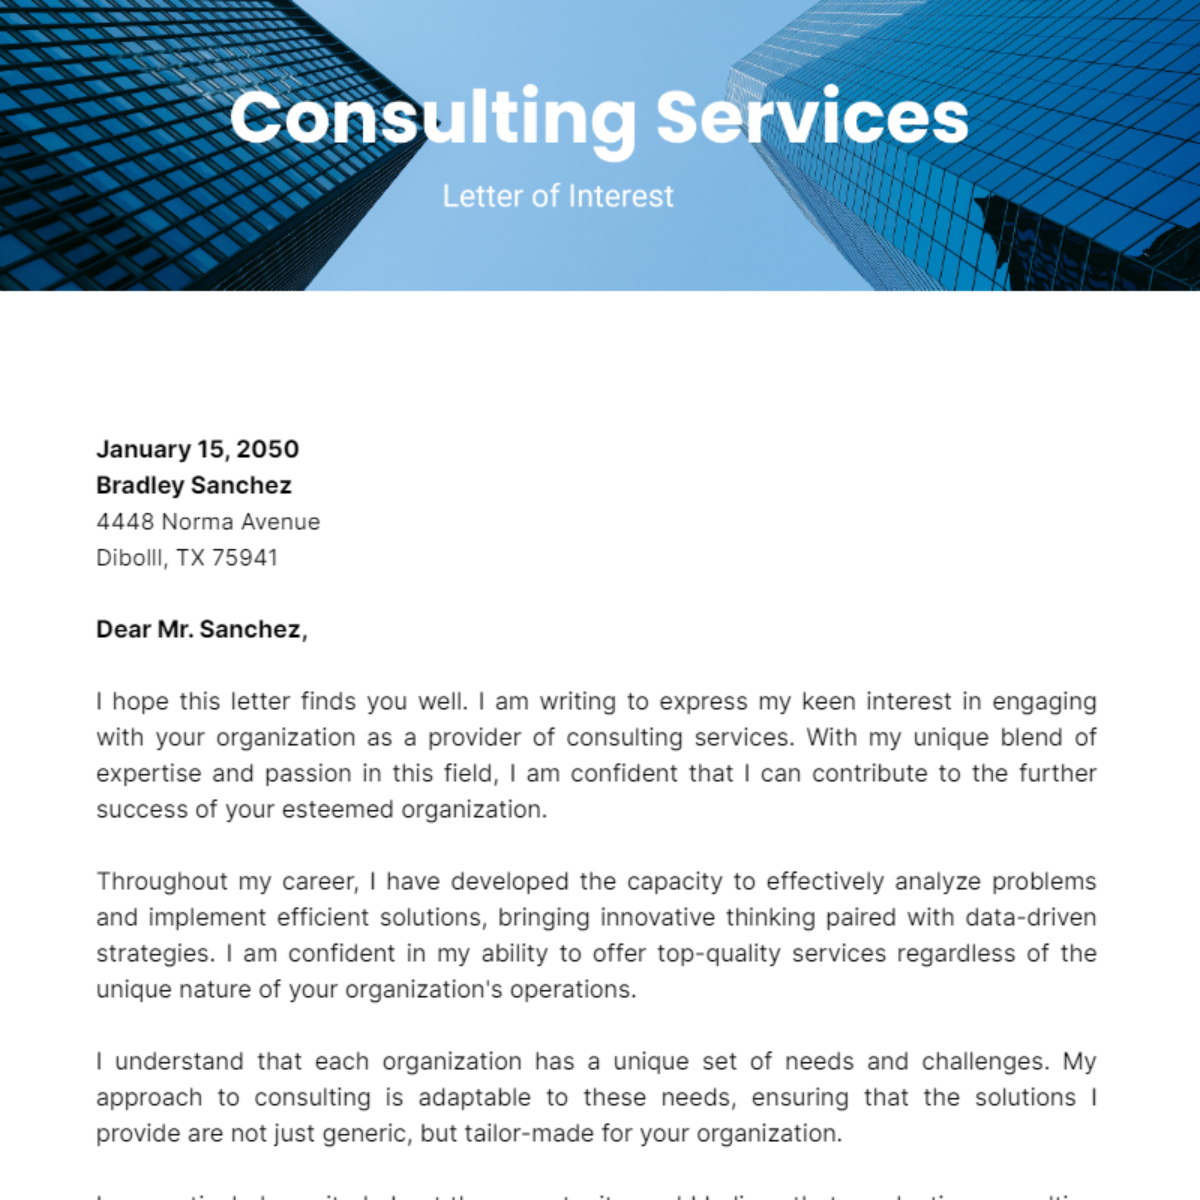 Consulting Services Letter of Interest Template